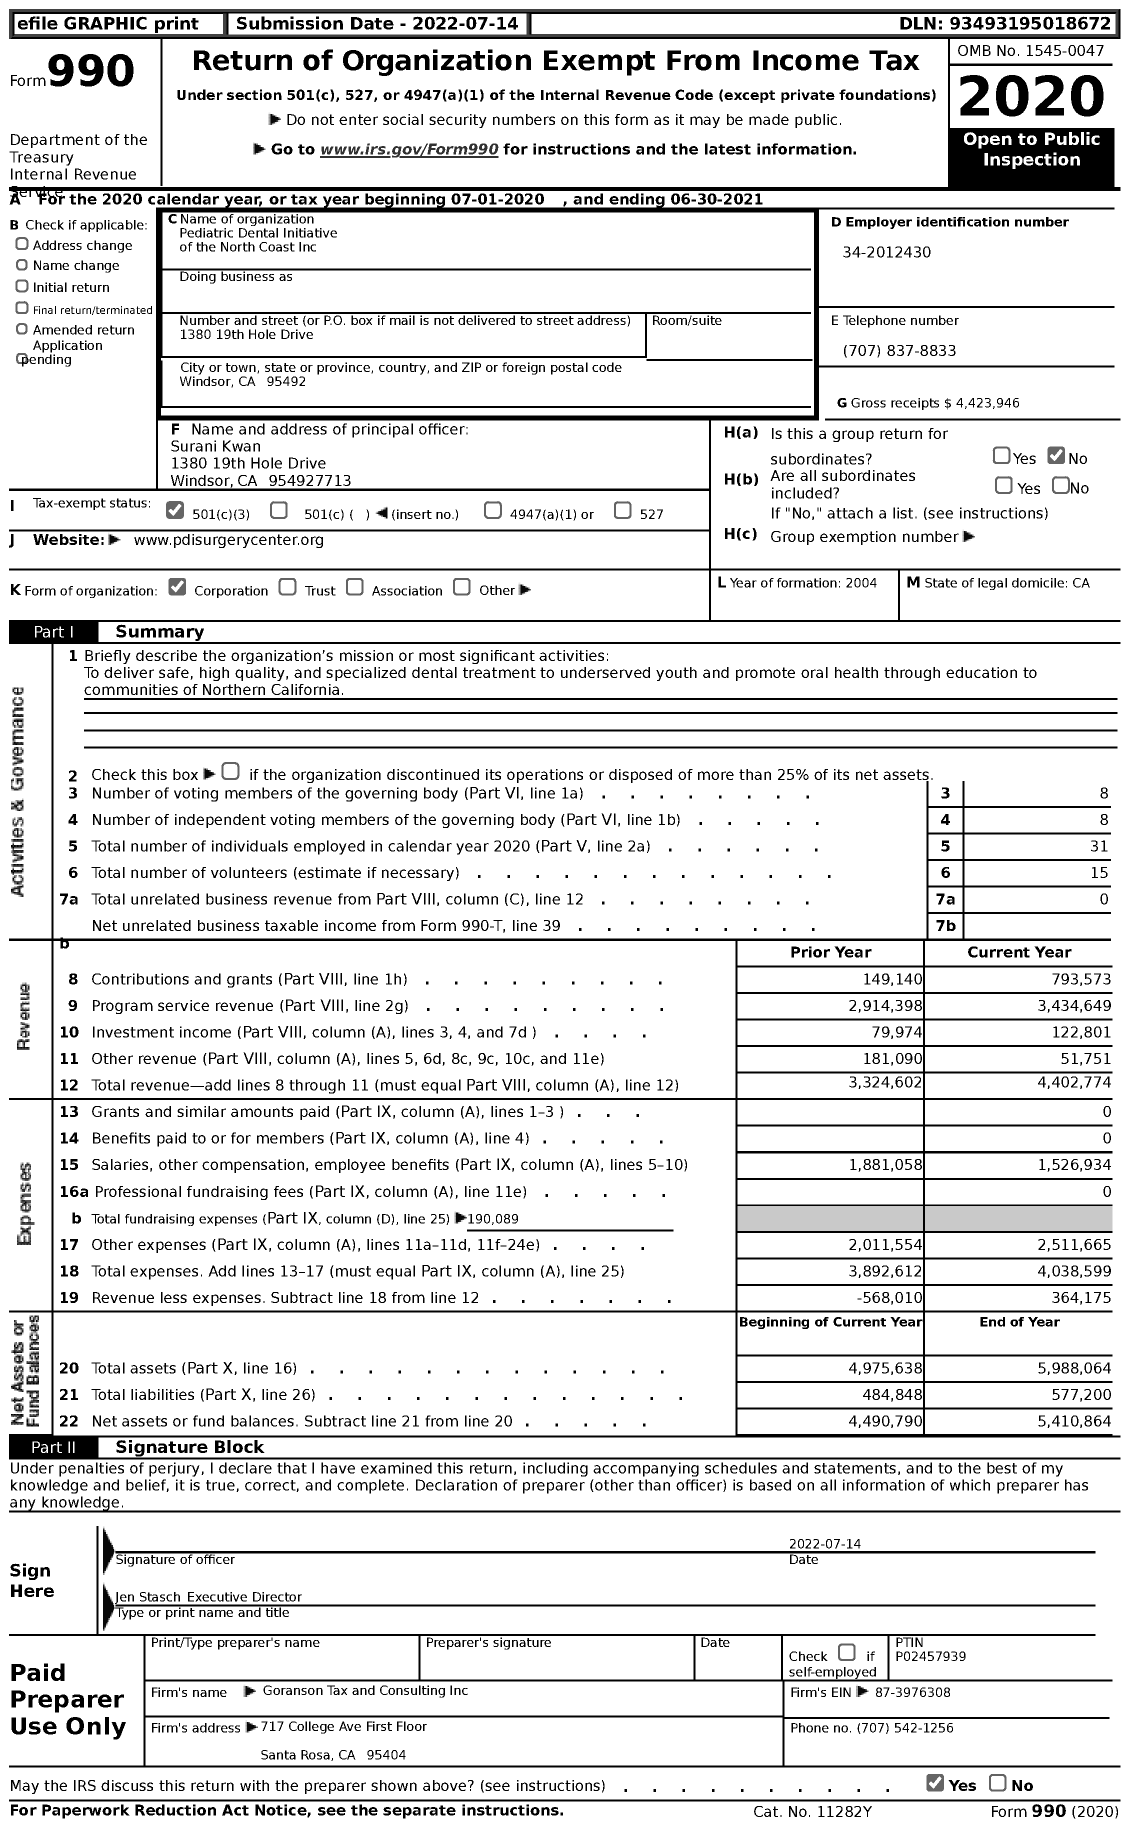 Image of first page of 2020 Form 990 for Pediatric Dental Initiative of the North Coast